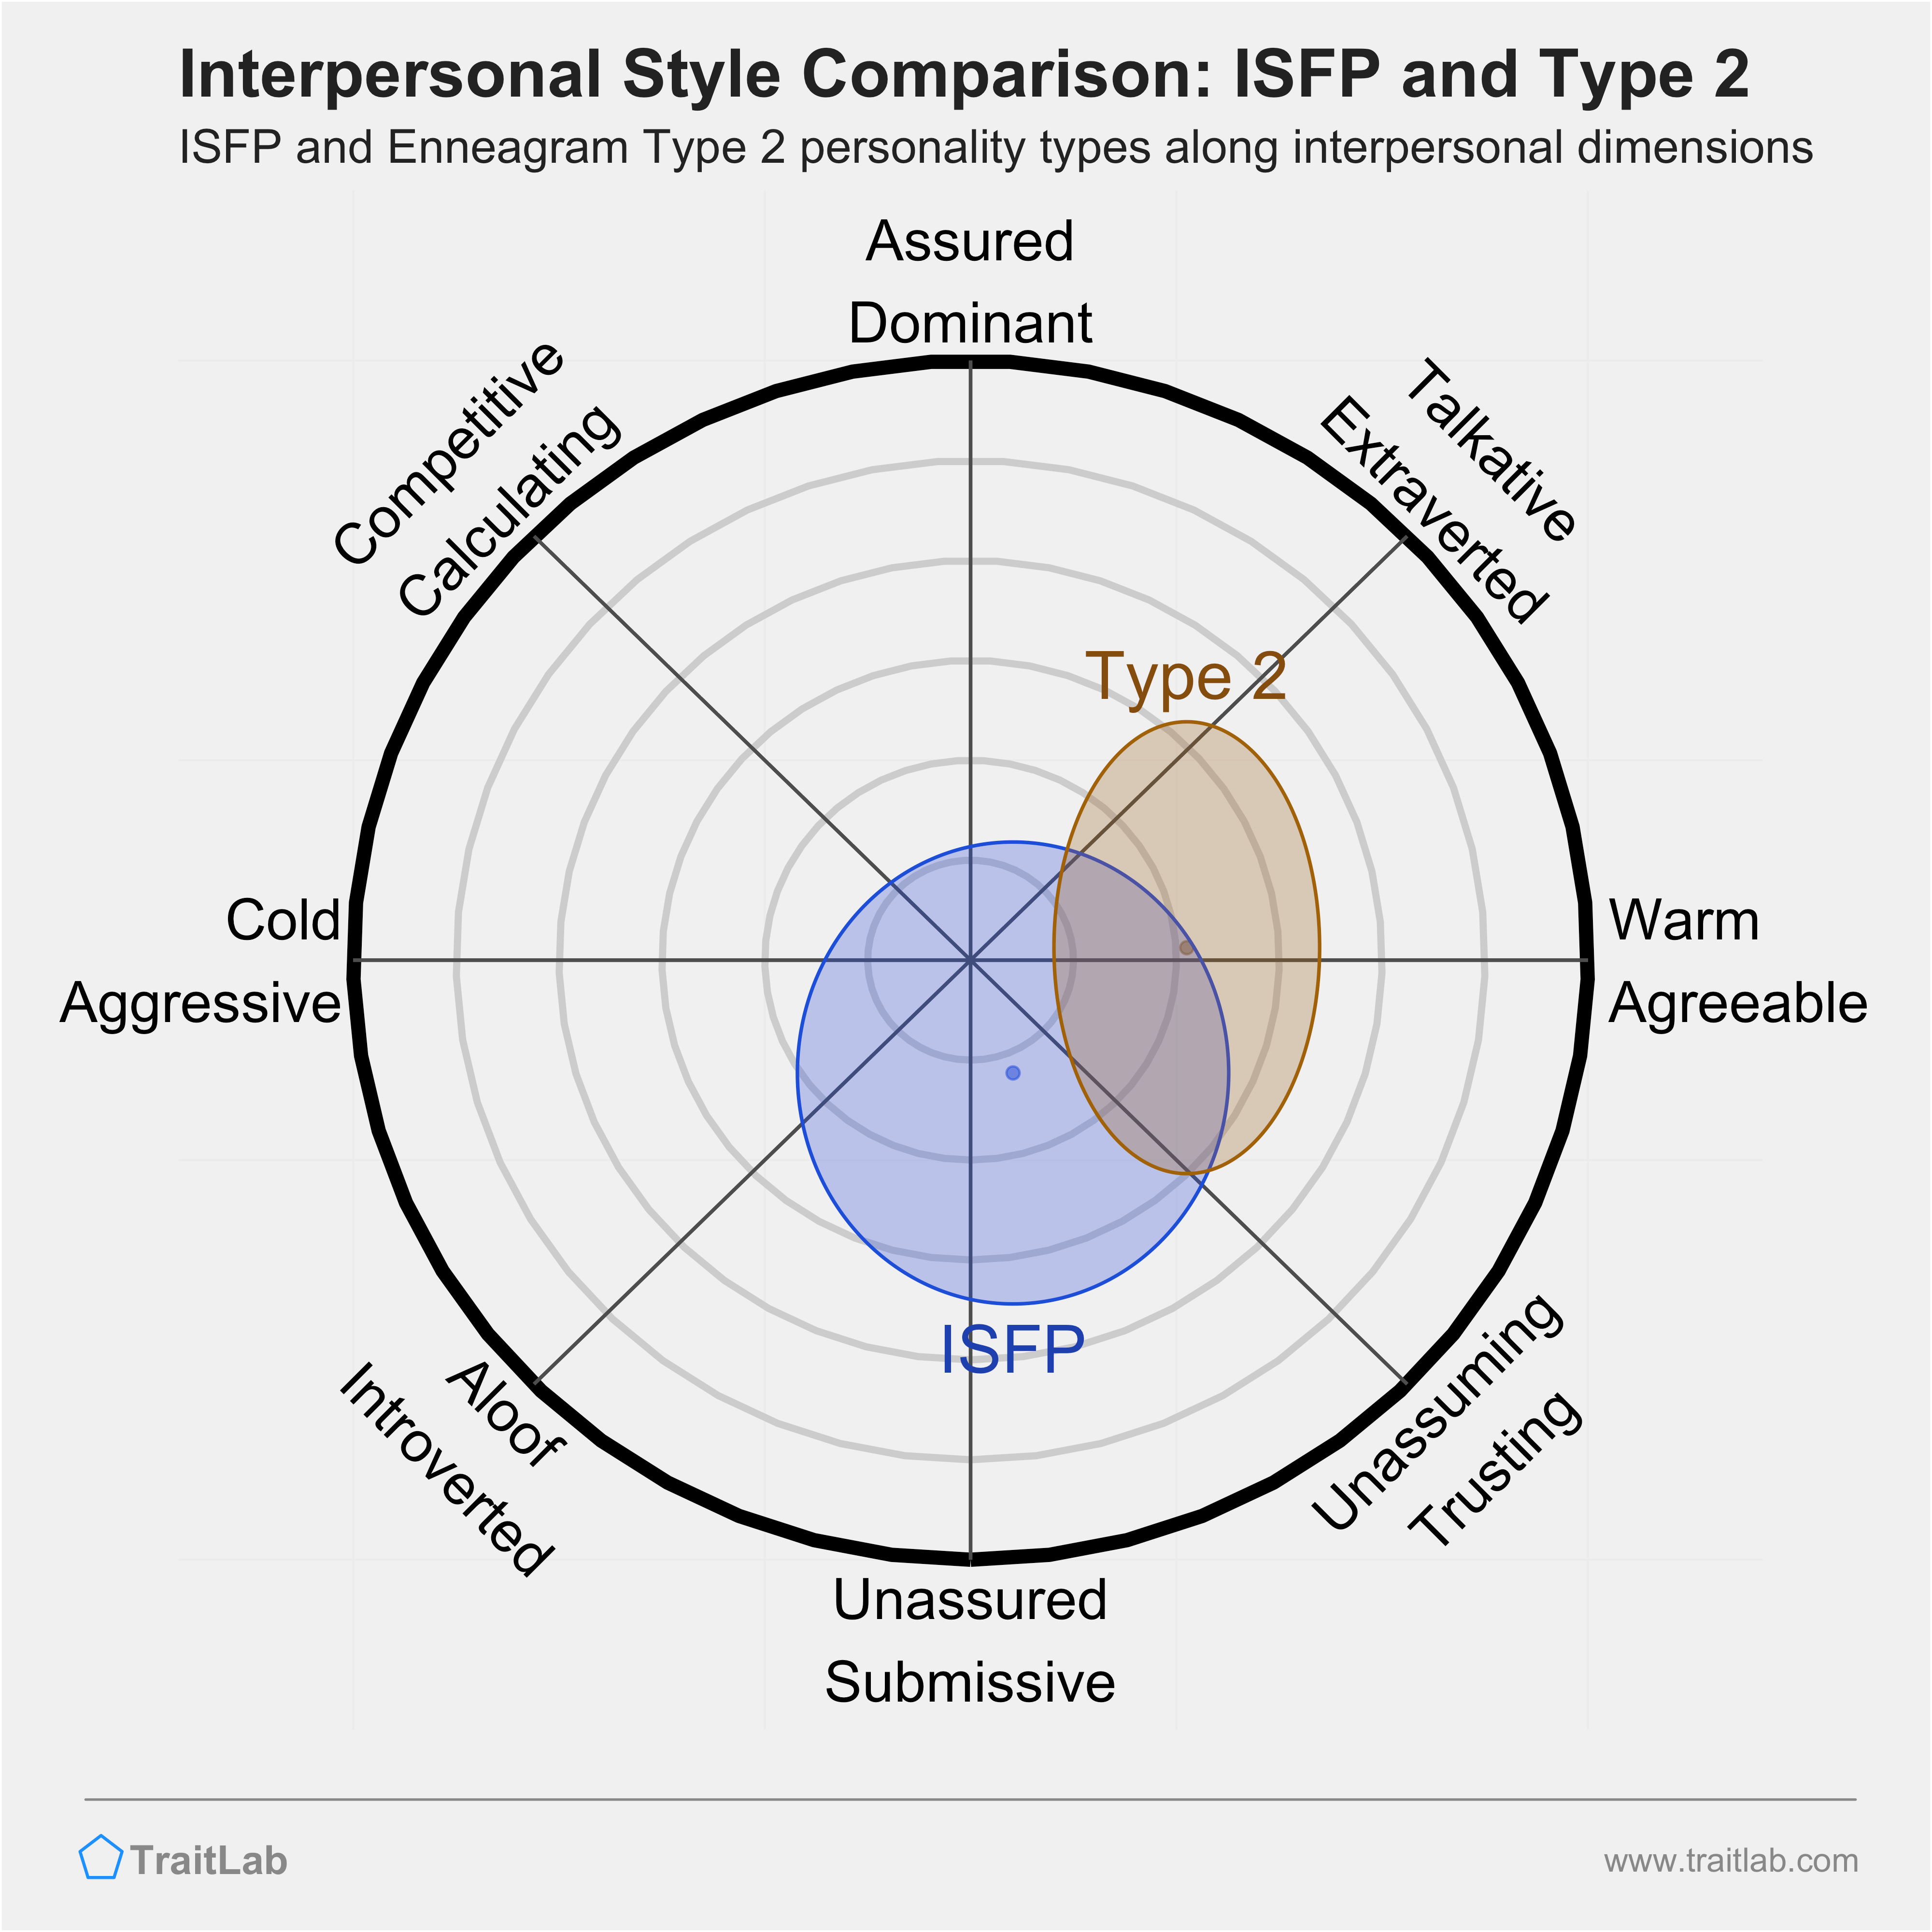 Enneagram ISFP and Type 2 comparison across interpersonal dimensions